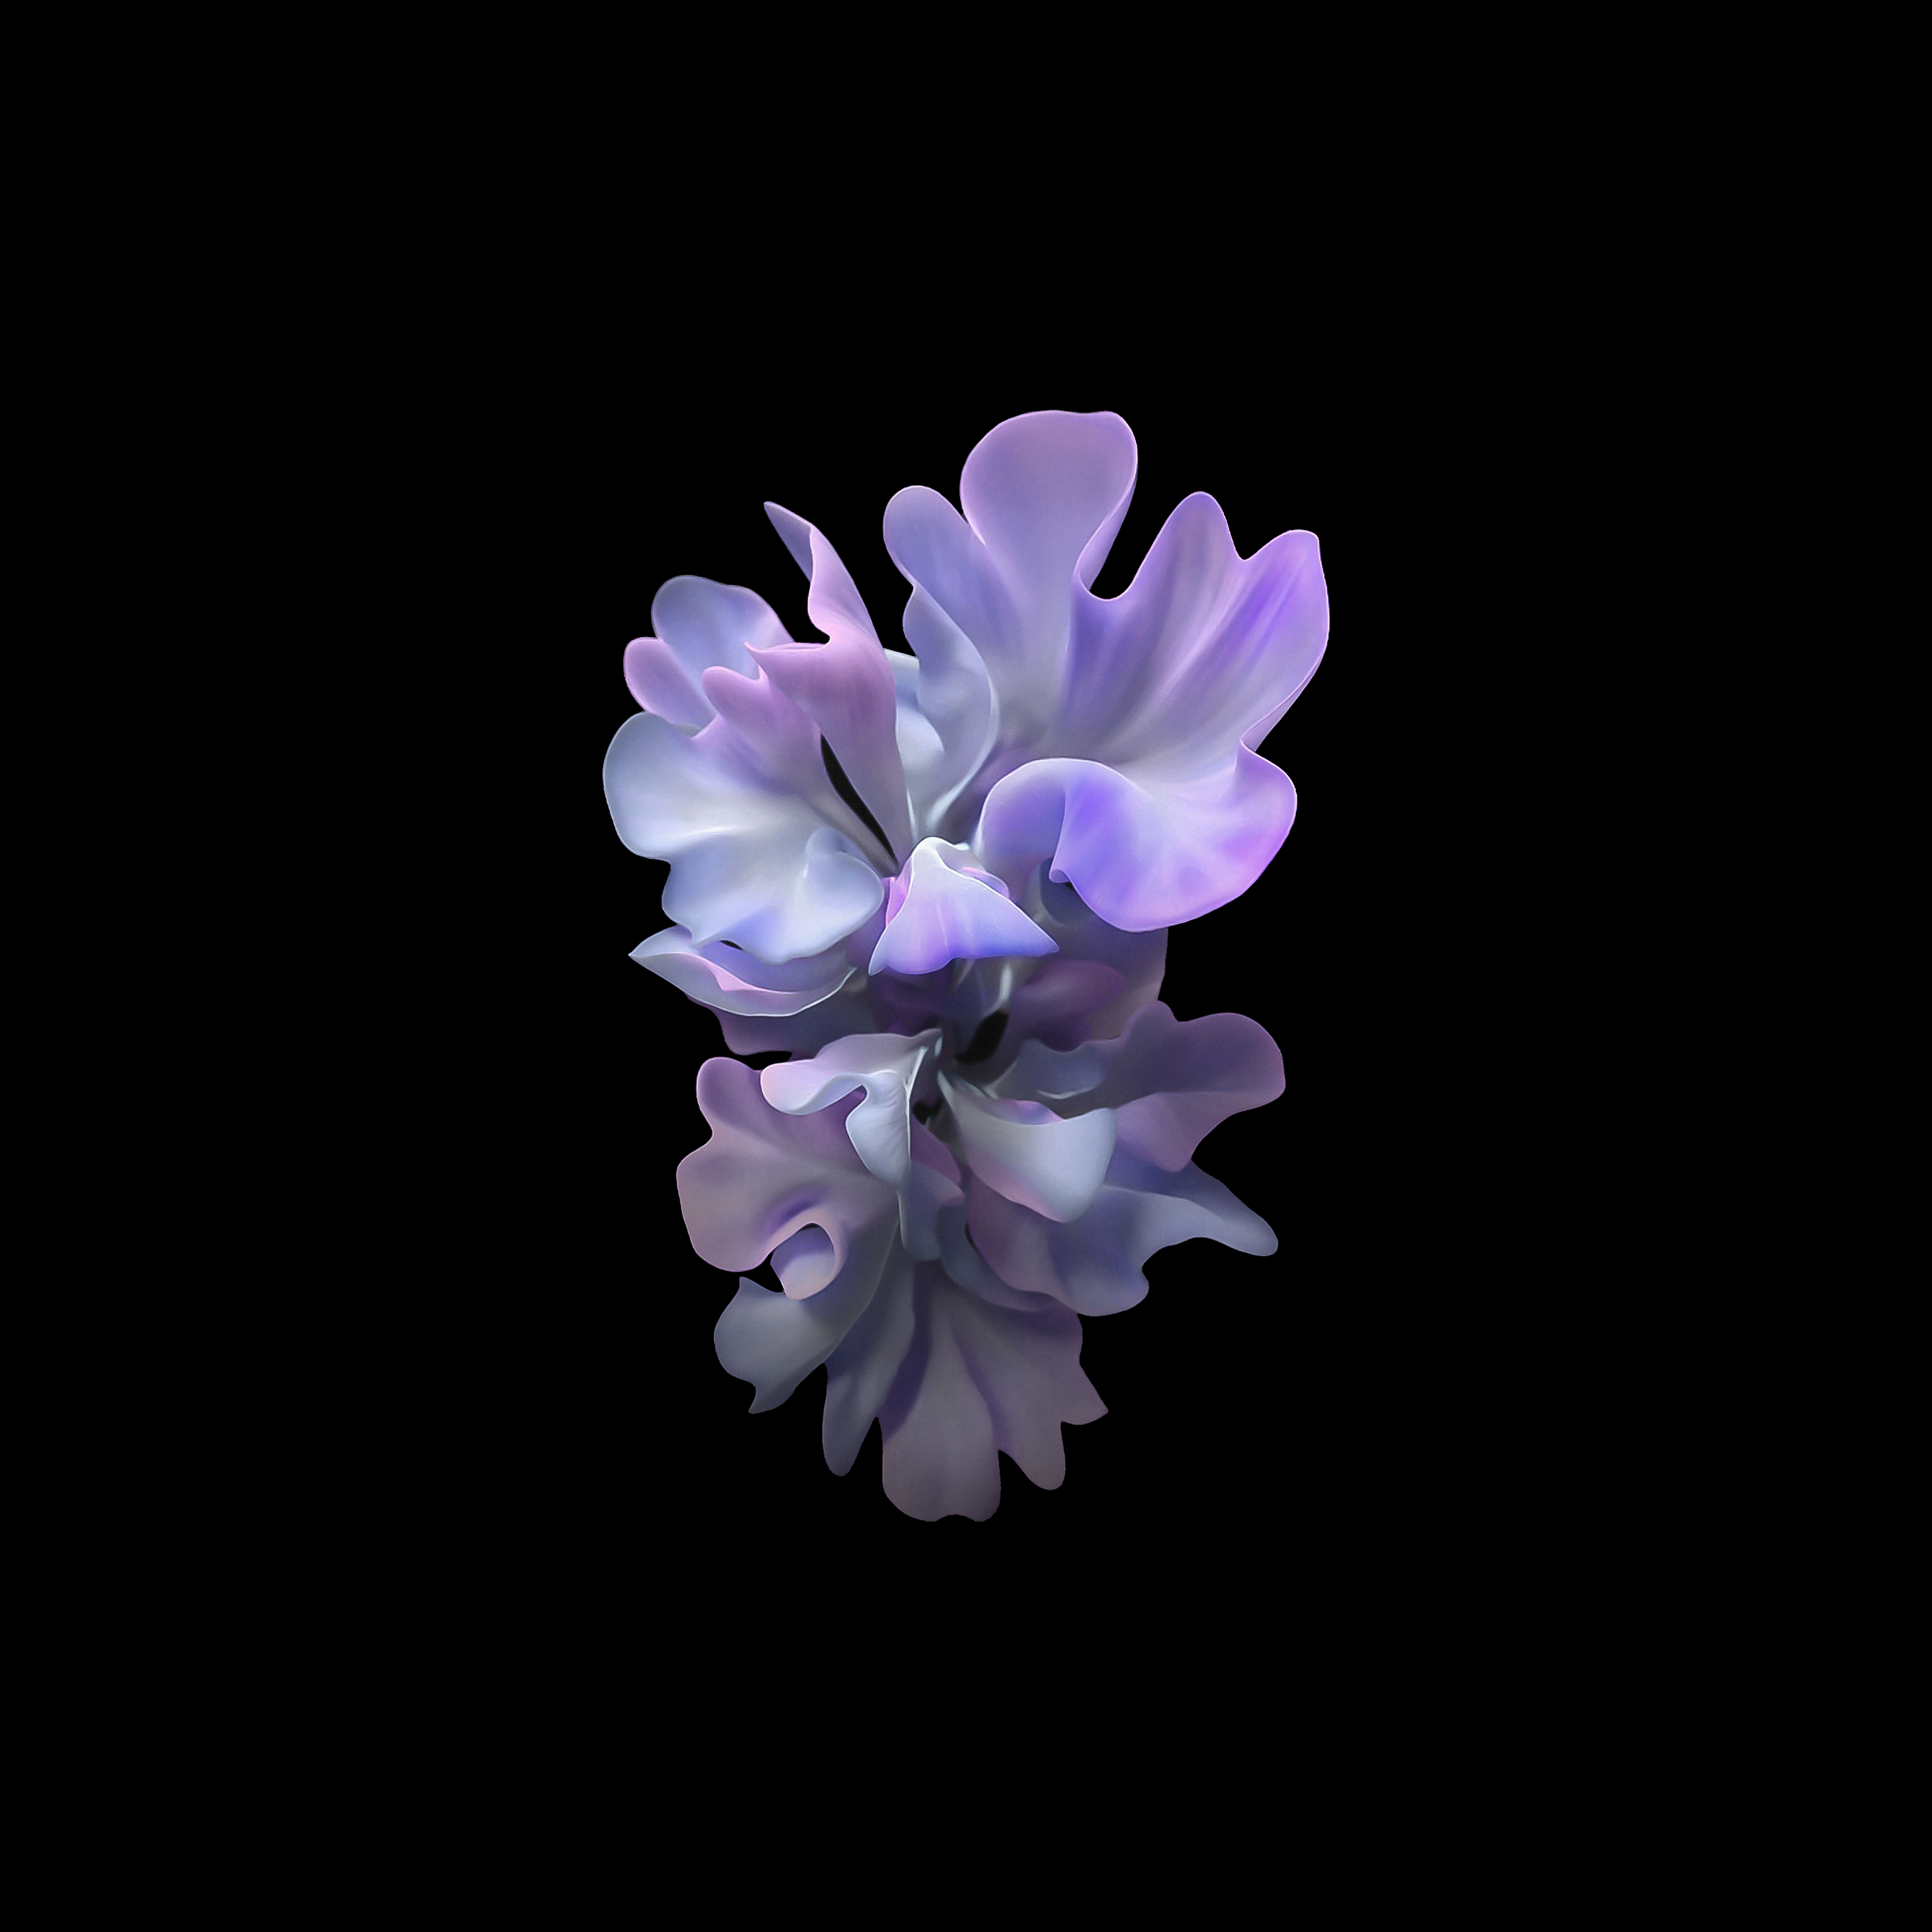 Download Galaxy Z Flip wallpaper and see your home screen 'bloom'